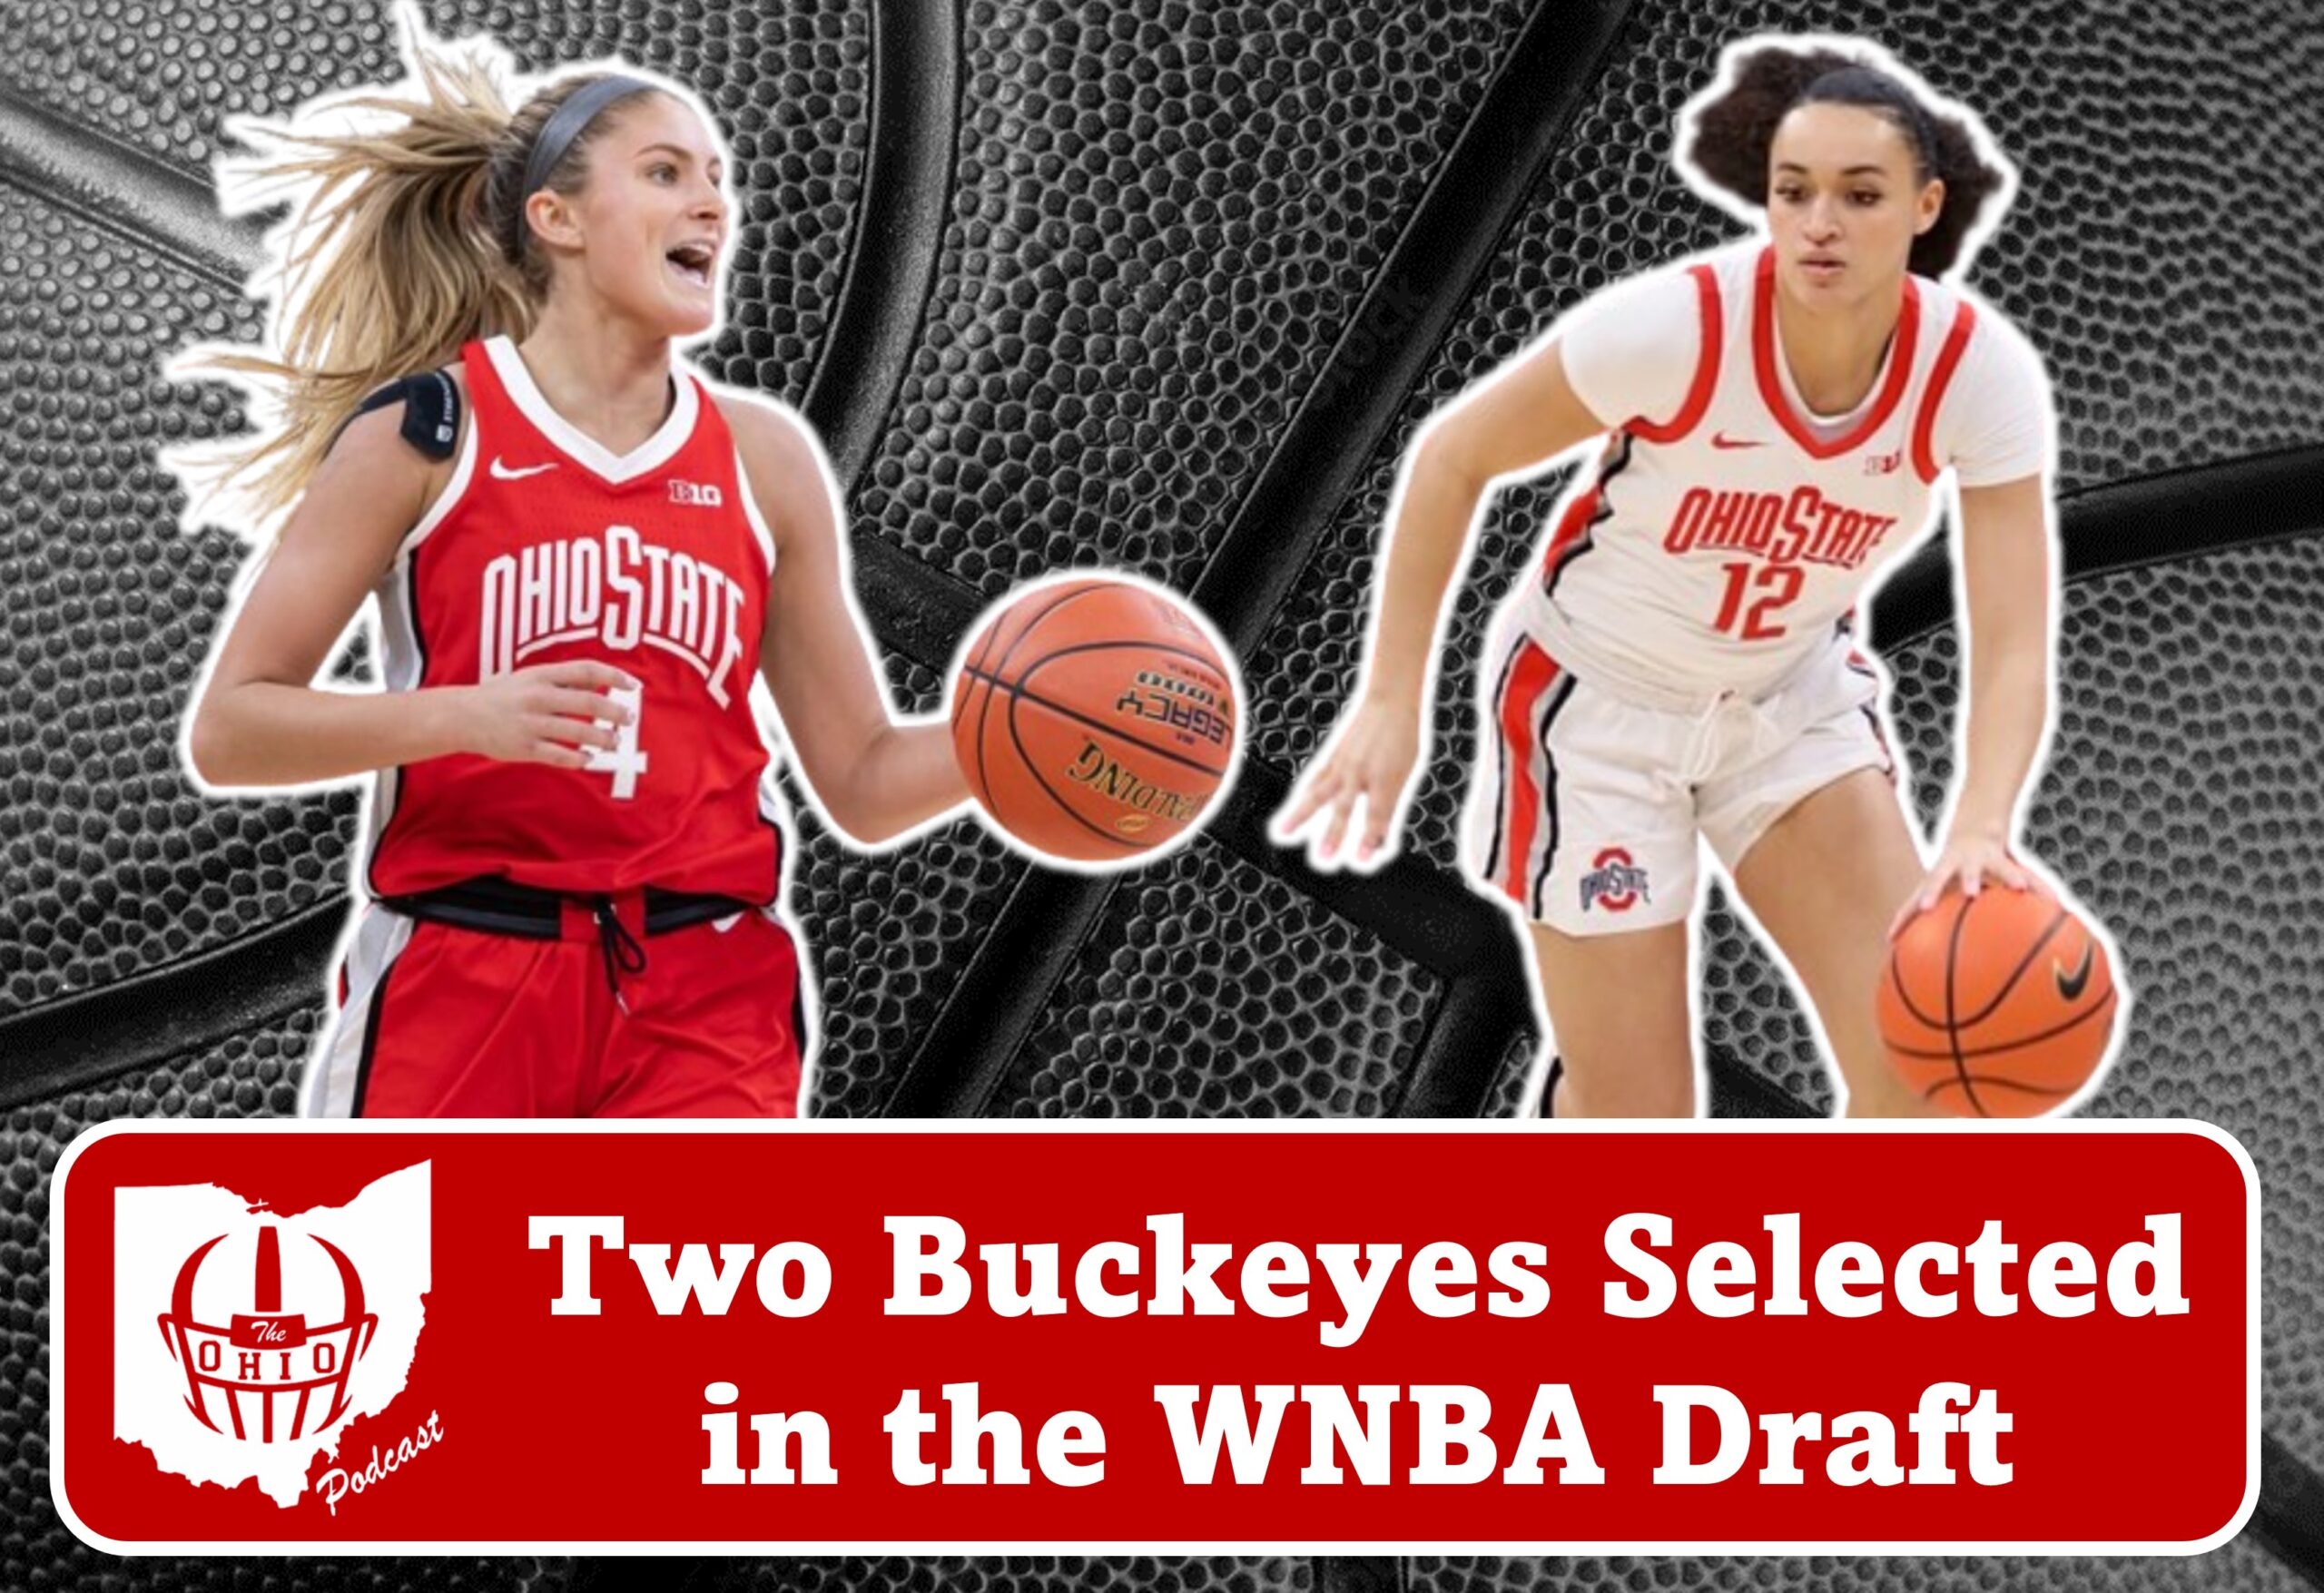 Two Buckeyes Selected in the WNBA Draft